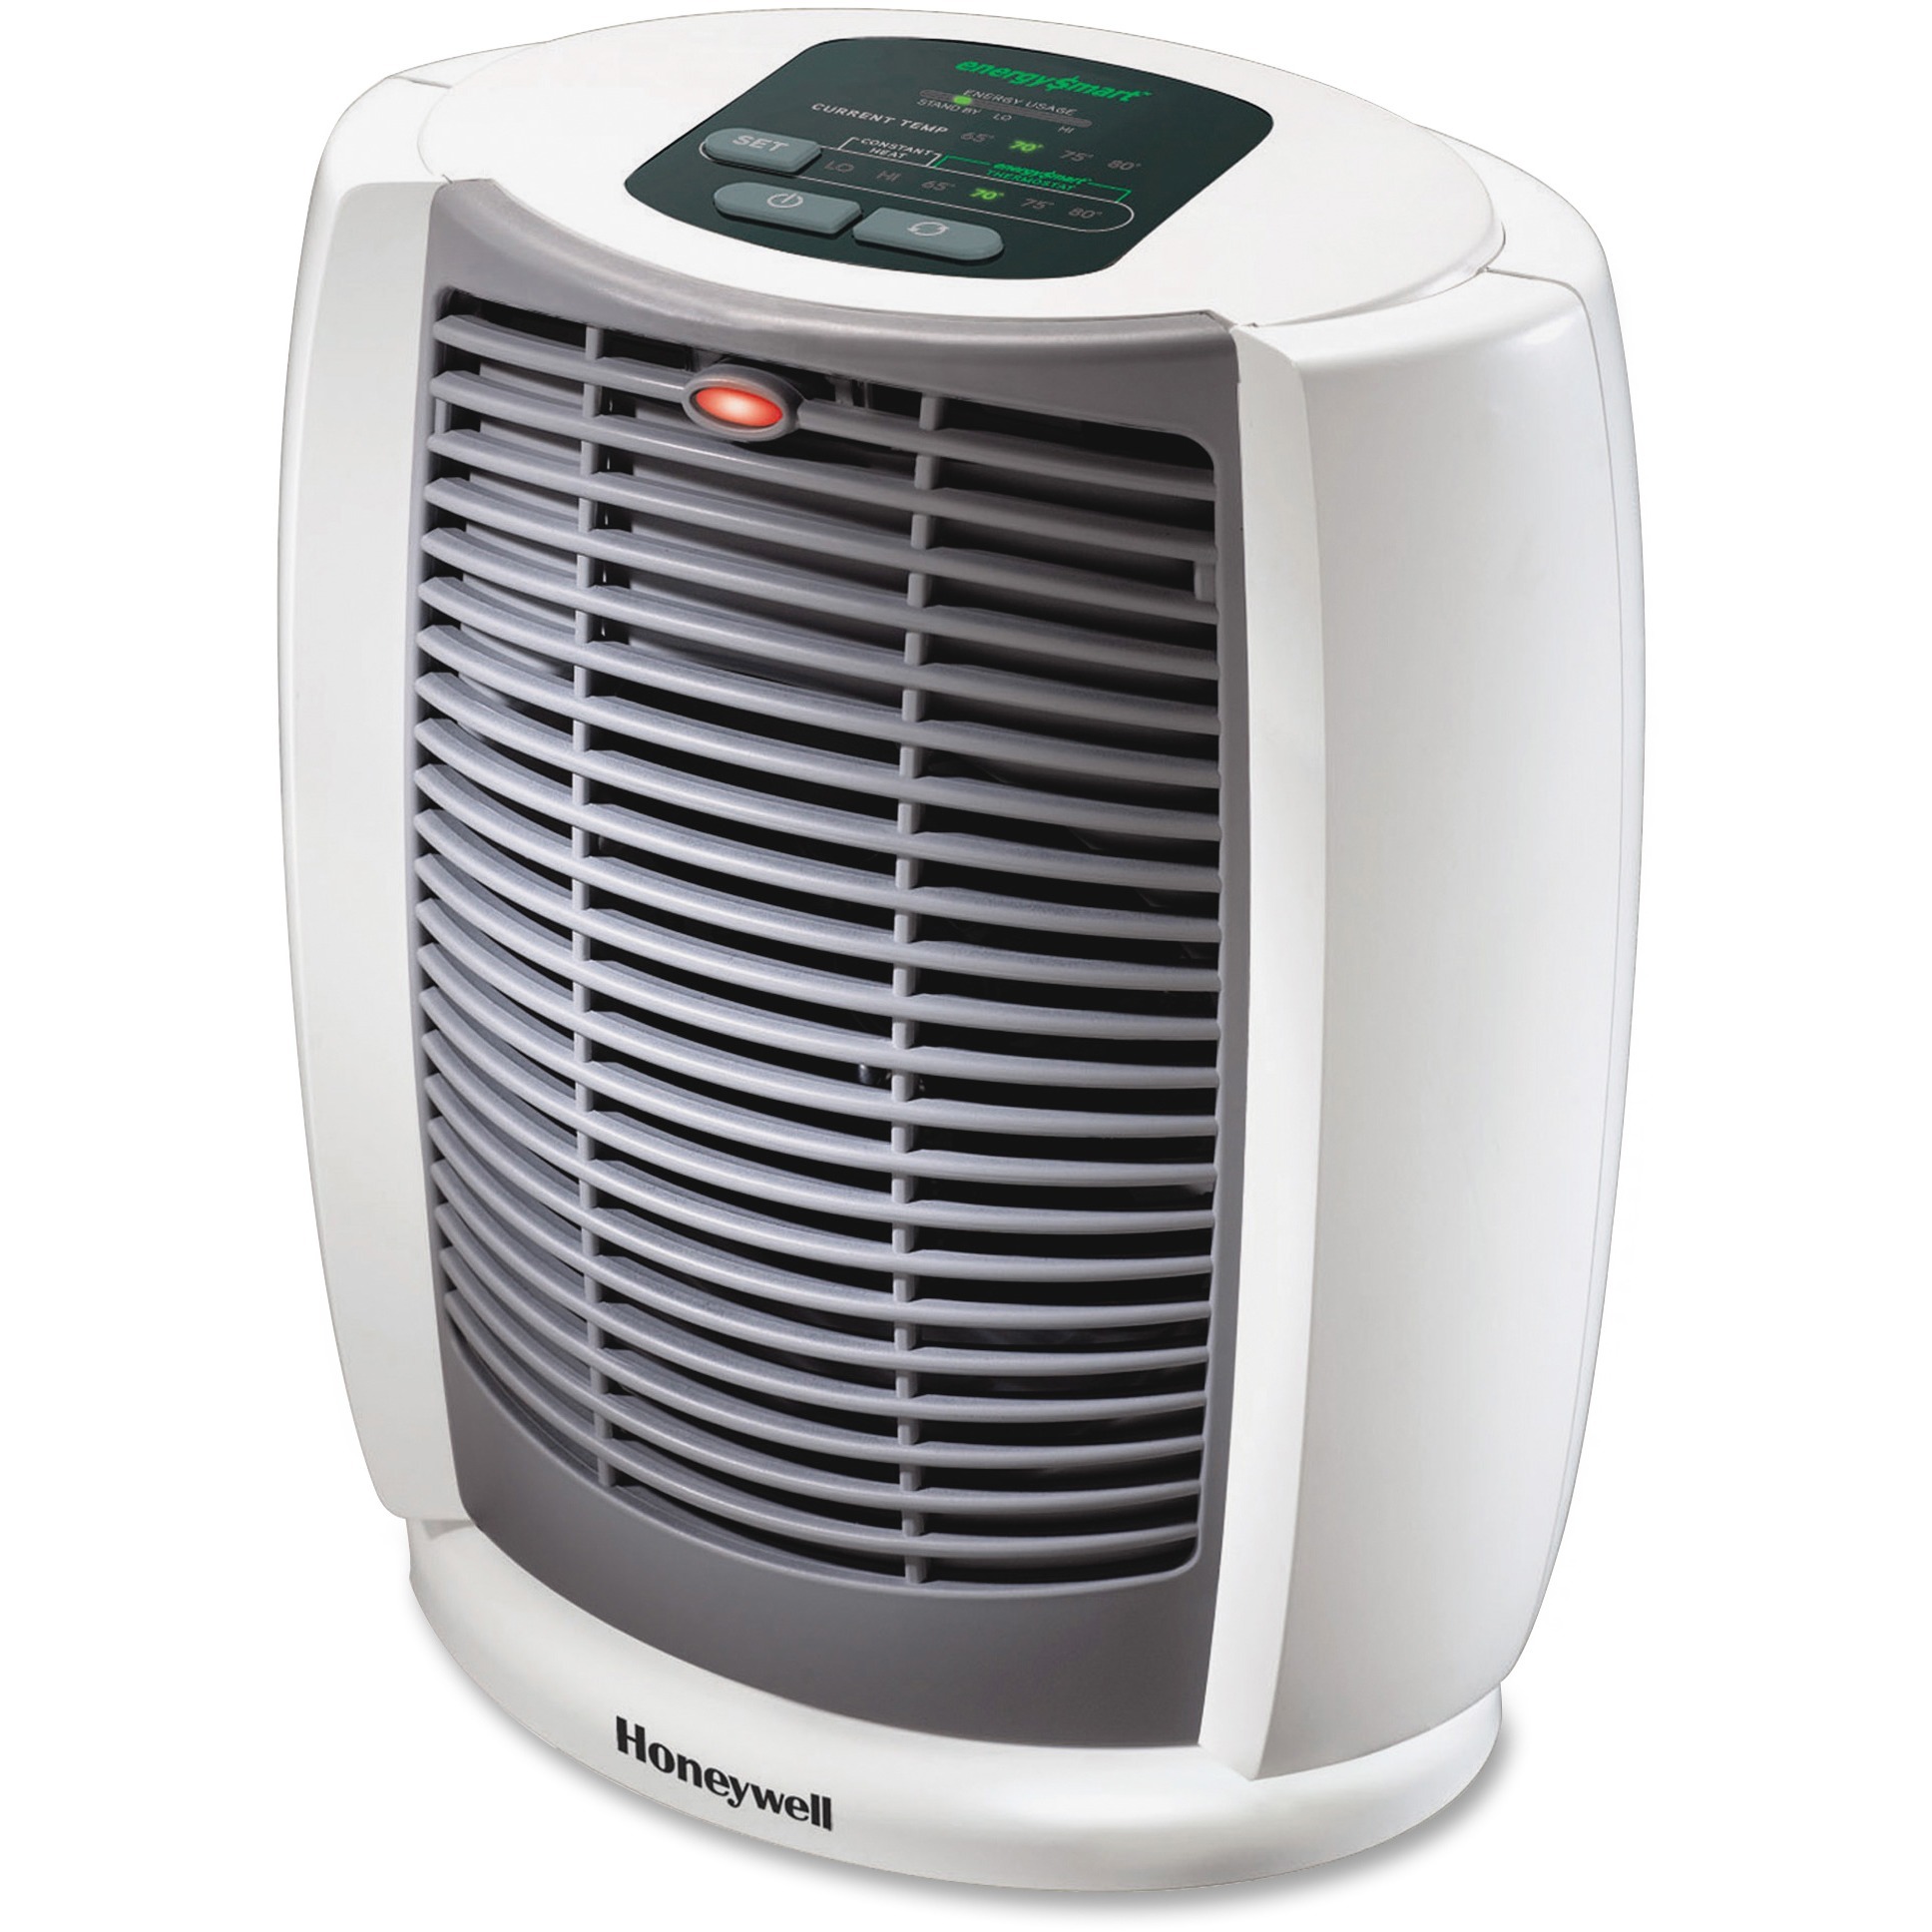 Honeywell HZ-7304U Deluxe EnergySmart Cool Touch Heater (White) $26.01 + Free Shipping w/ Walmart+ or orders $35+